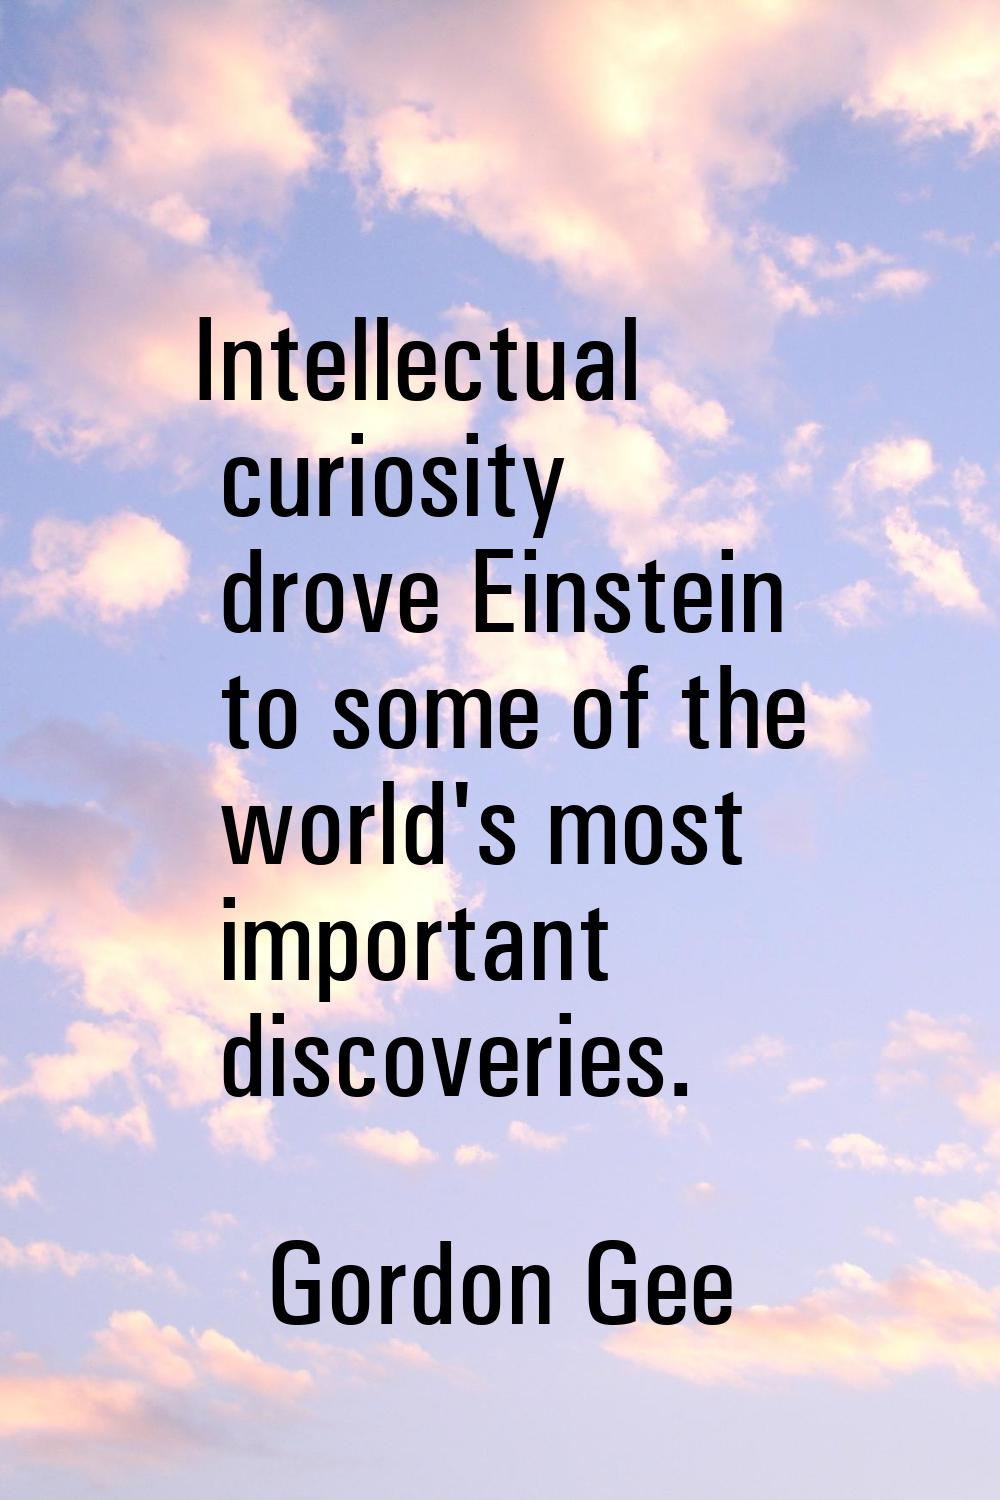 Intellectual curiosity drove Einstein to some of the world's most important discoveries.